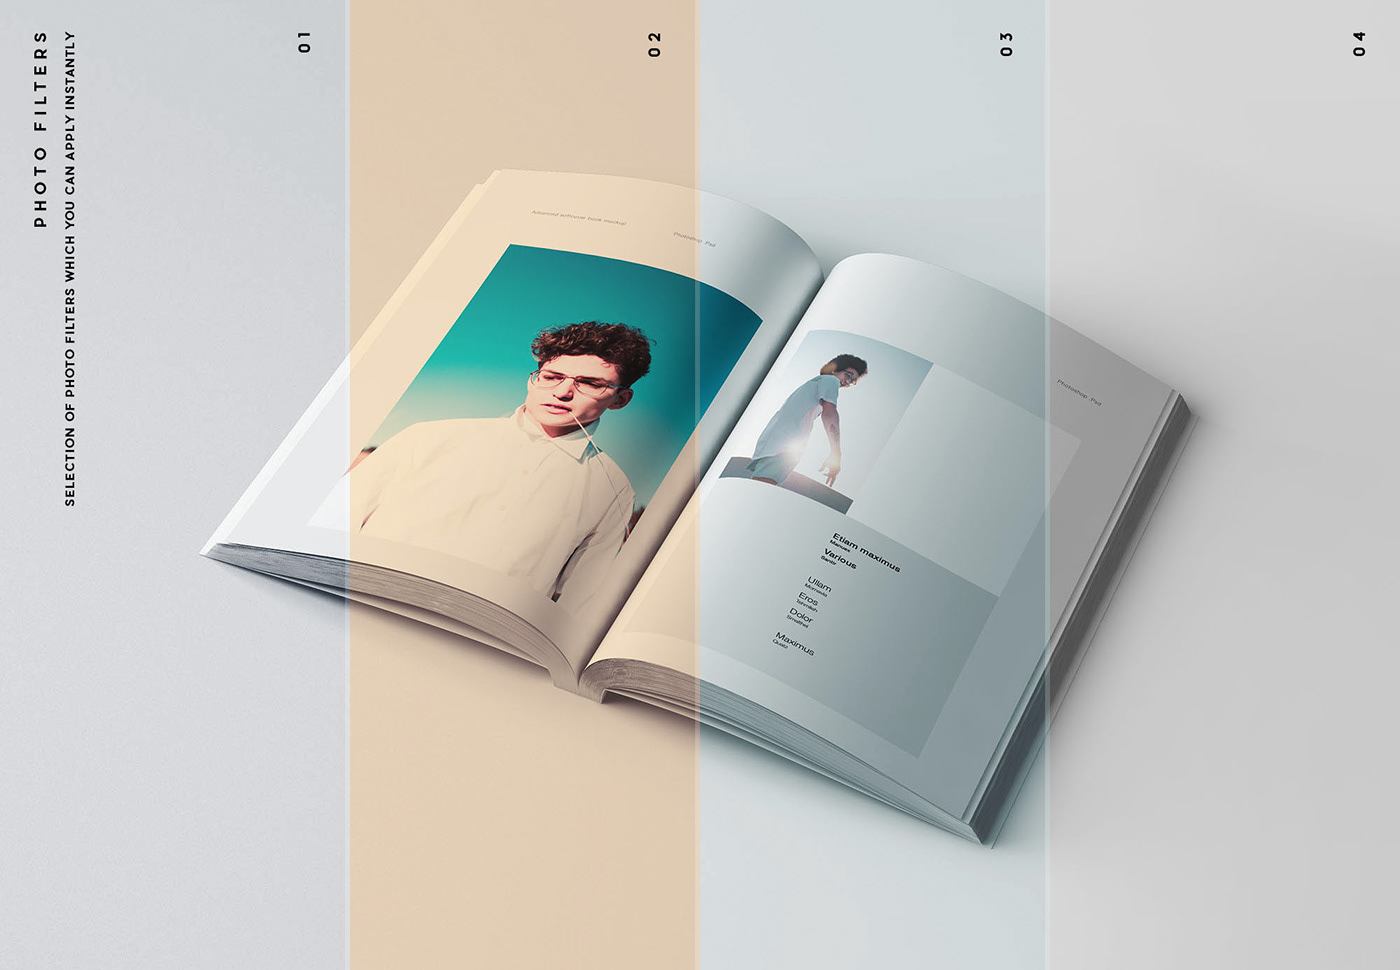 book softcover book download psd book book mockup a5 book mockup softcover book mockup free freebie free download